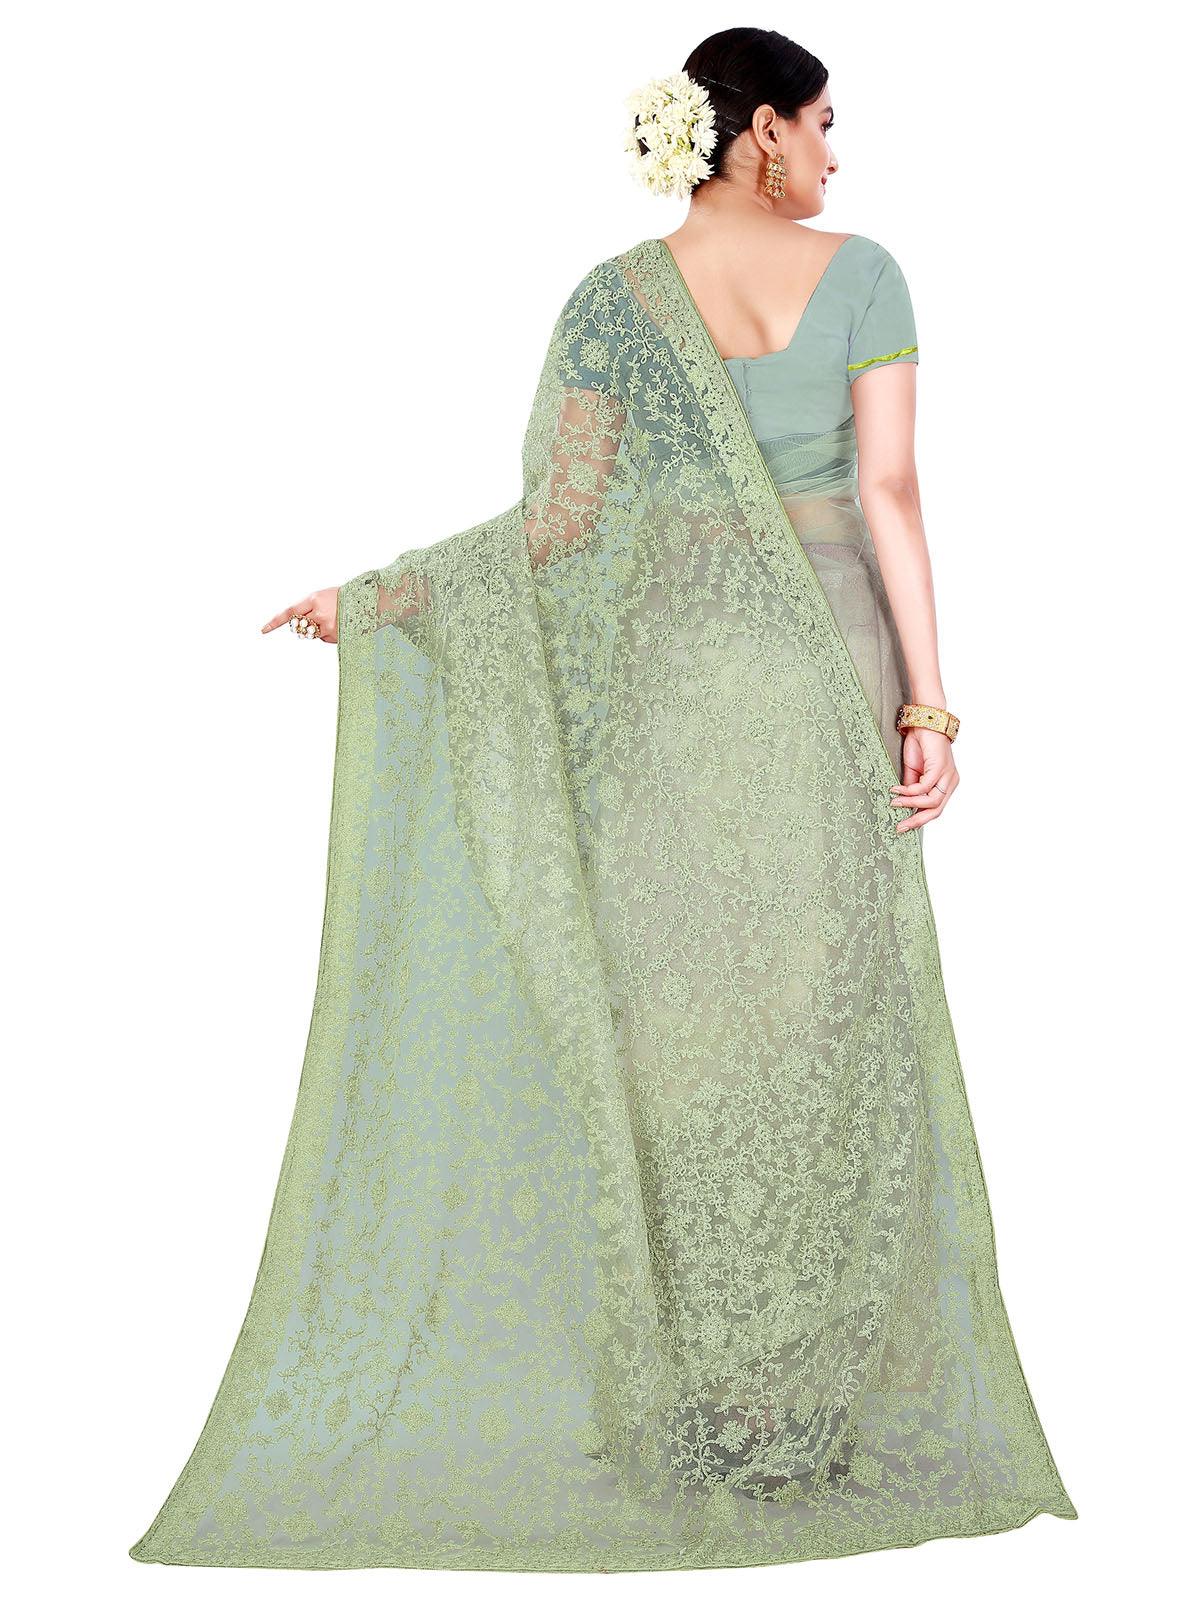 Green Net Embroidered Saree With Blouse Piece - Odette